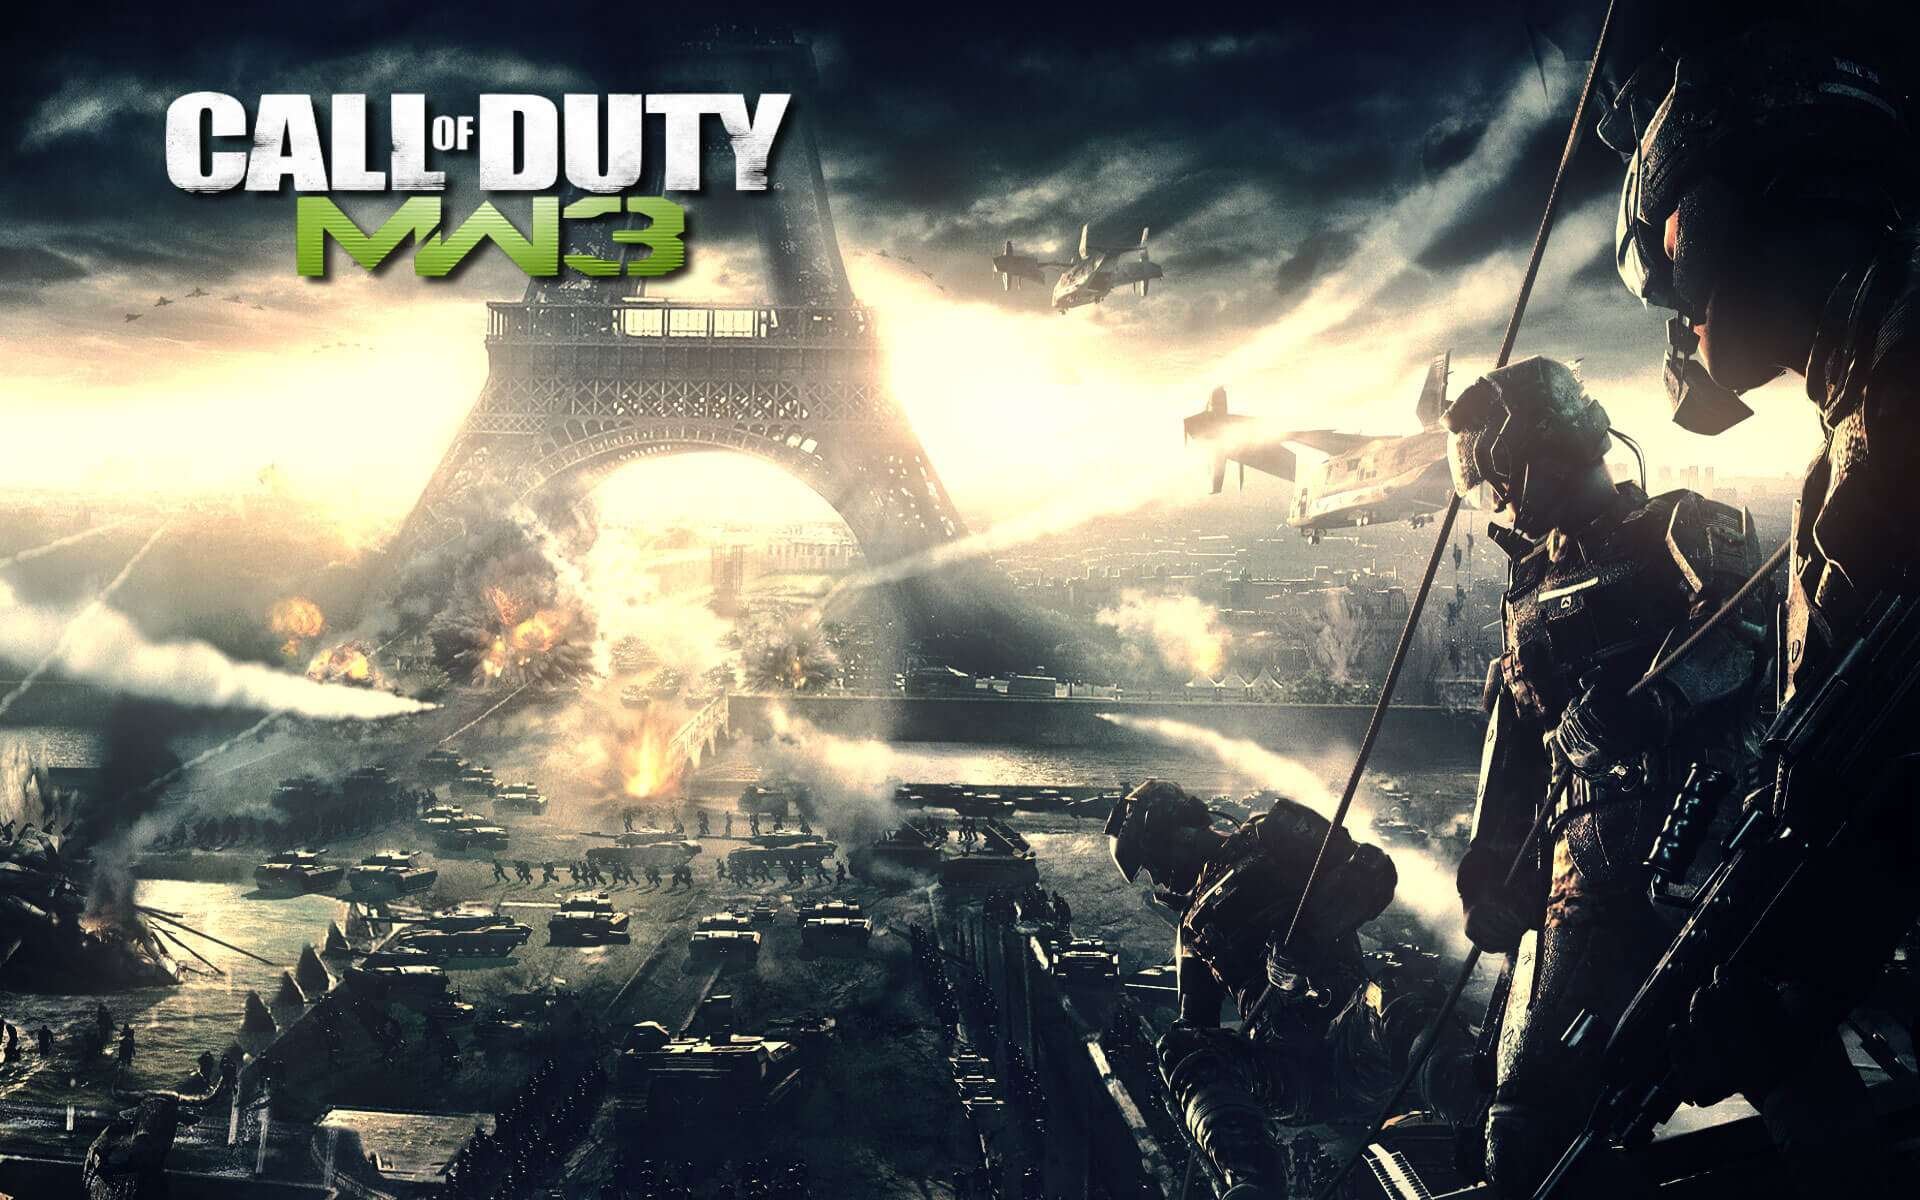 Call Of Duty Modern Warfare 3 - PC Games And Problems